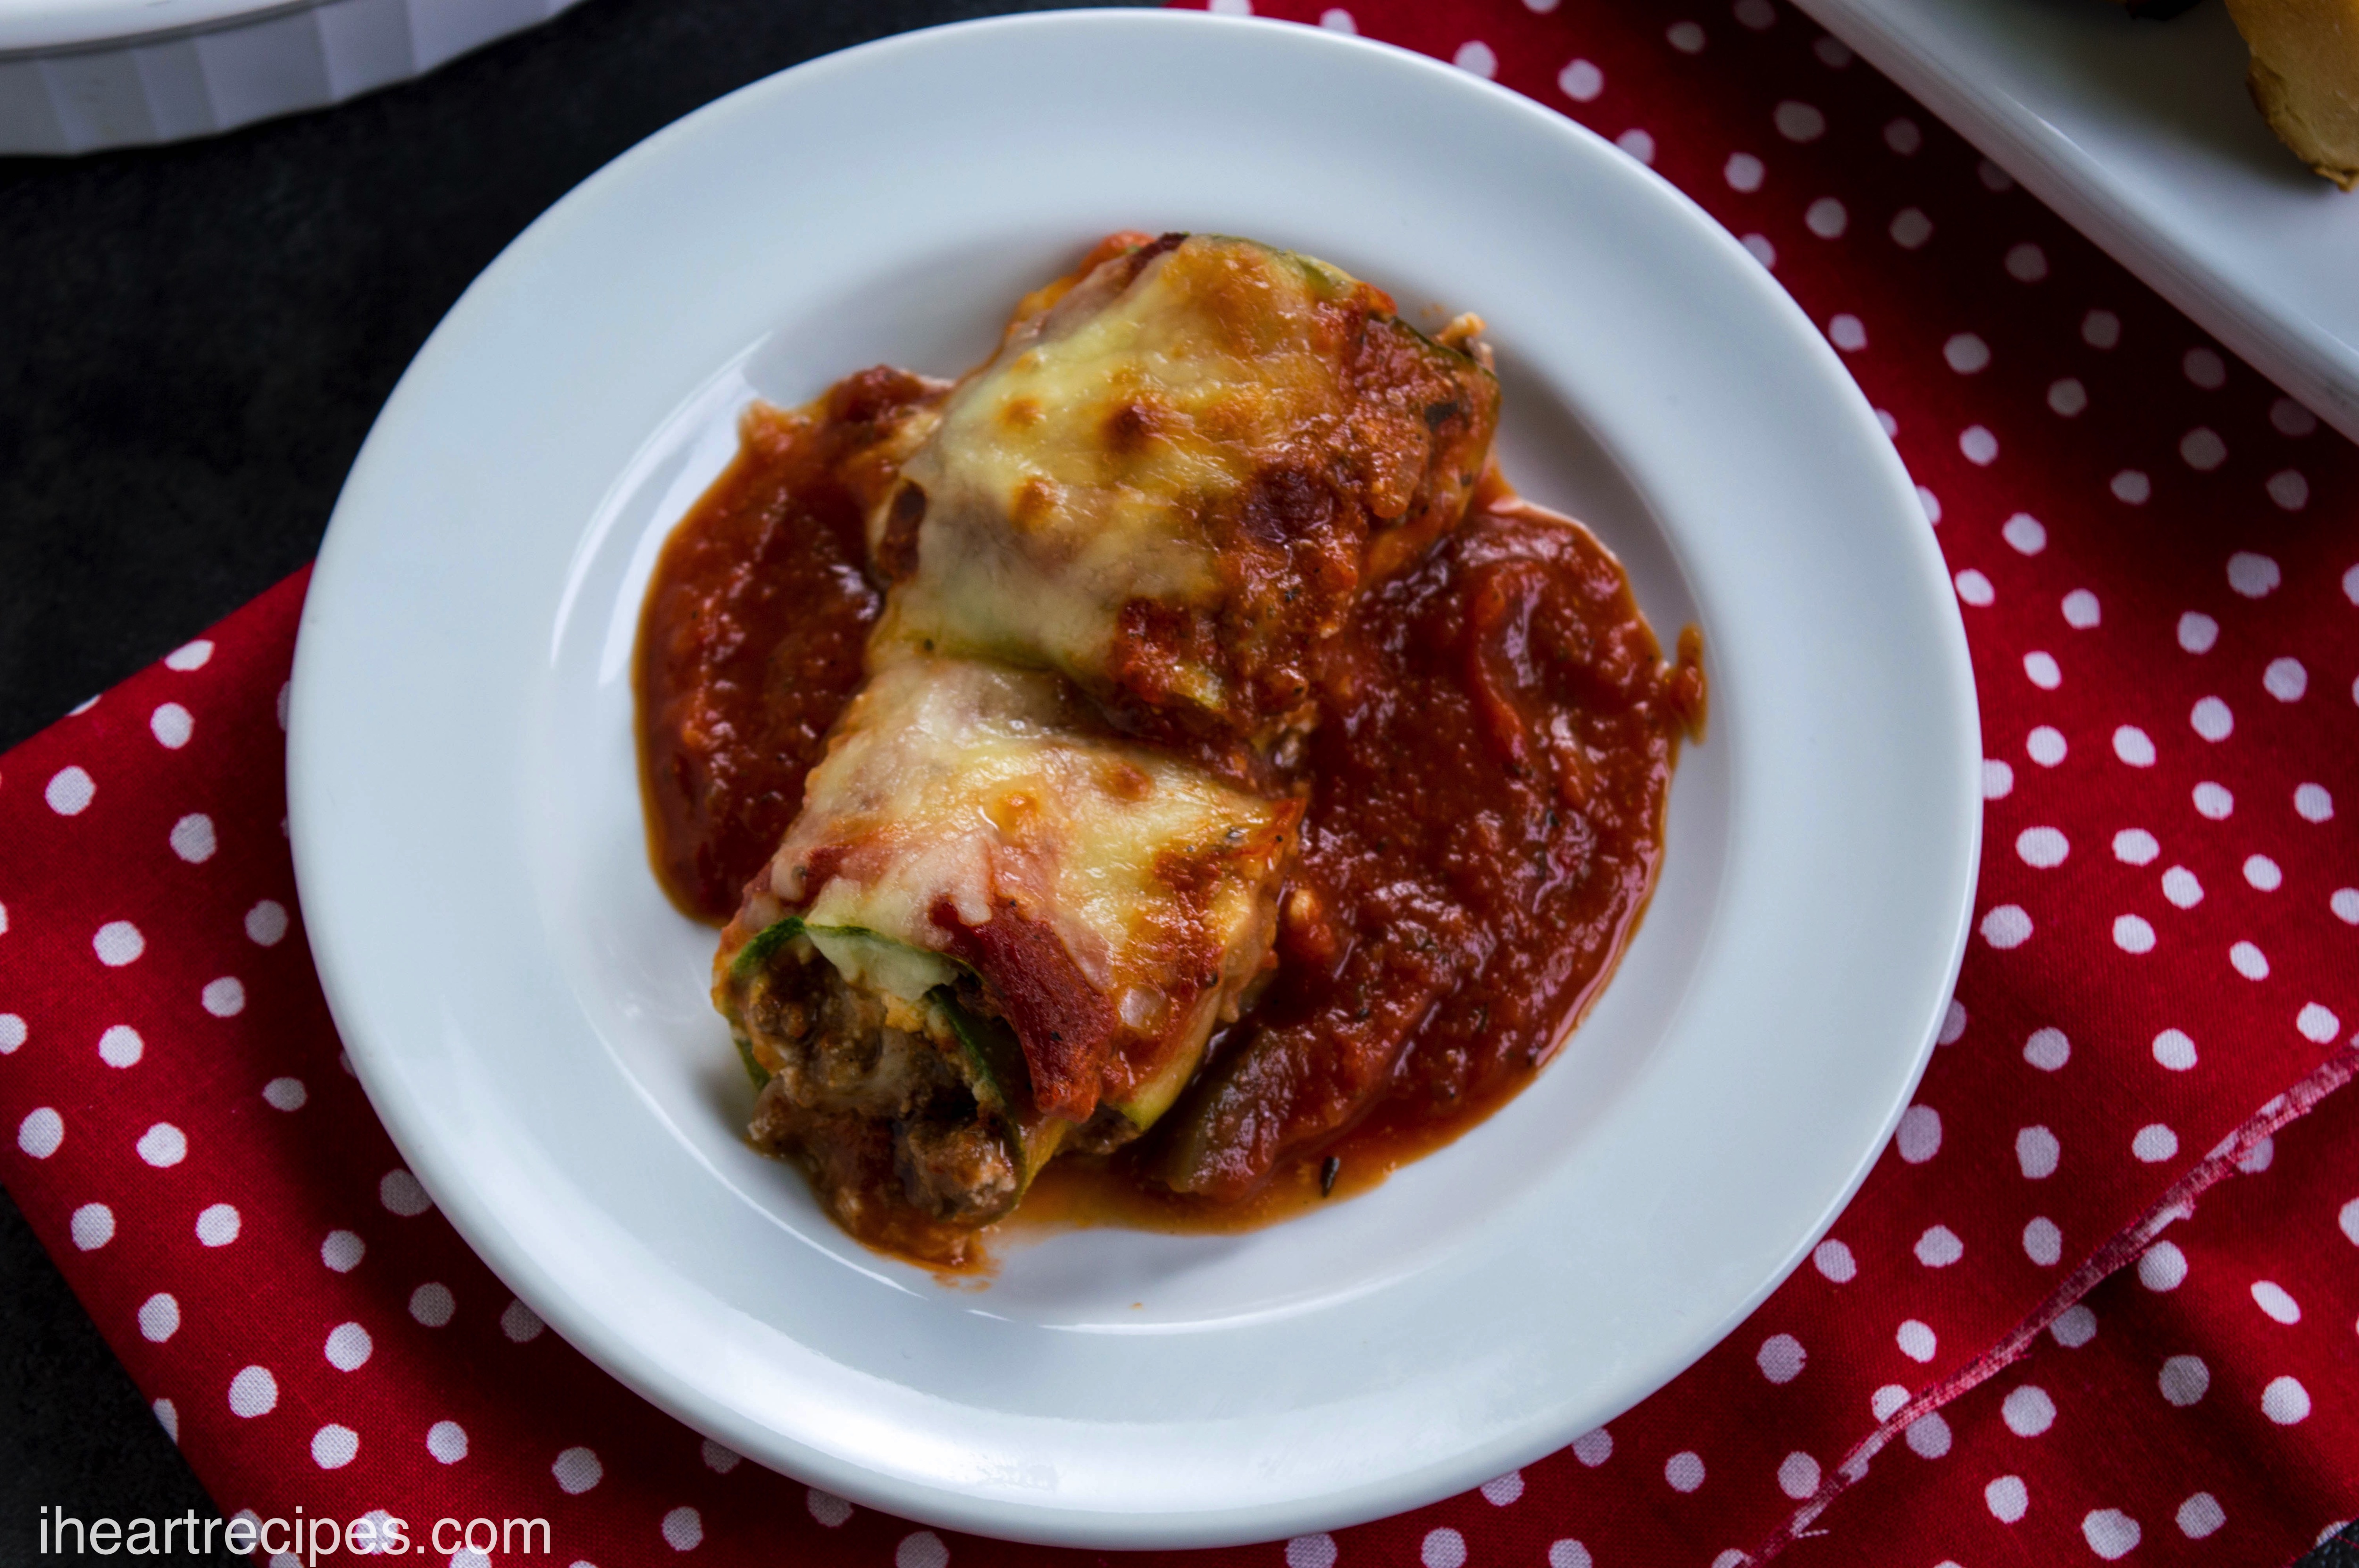 Savory zucchini stuffed with tender beef and creamy ricotta, topped with tangy cheese and served on a bed of hearty marinara sauce, is presented on a white platter.